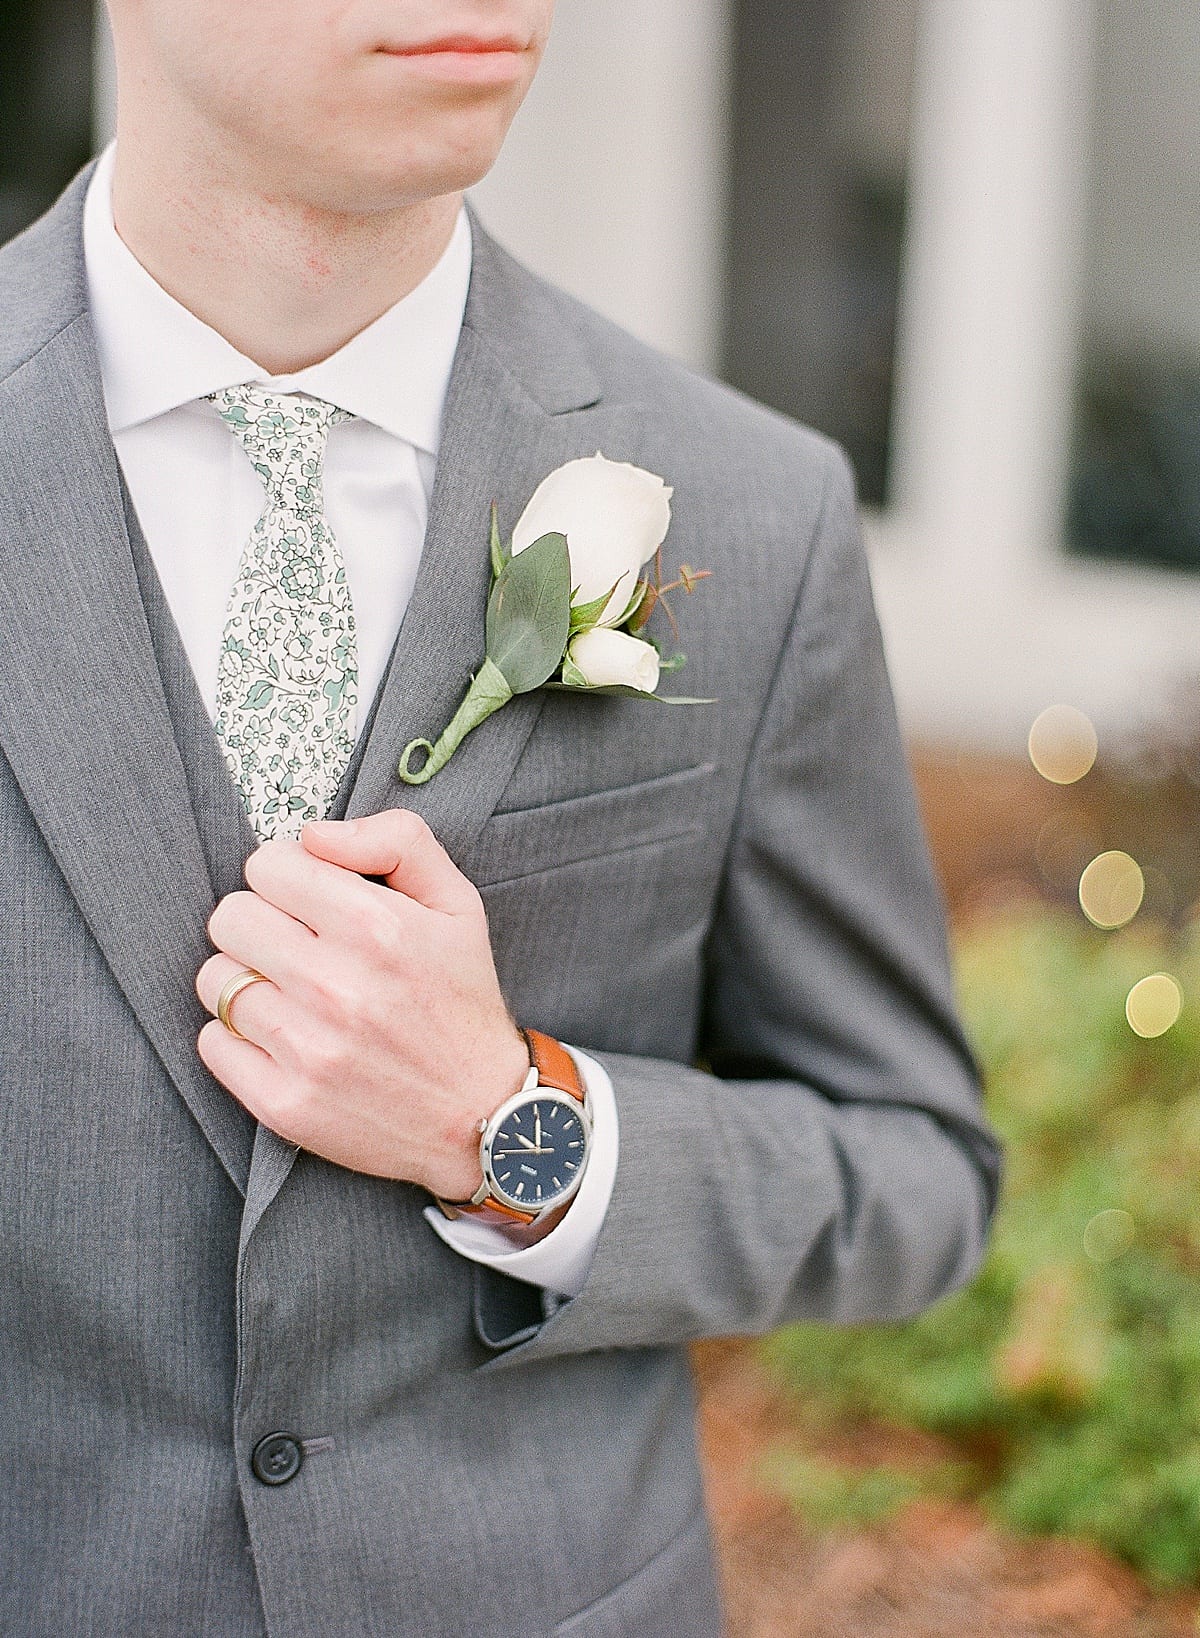 Groom Details Watch, Boutonniere, and Tie Photo